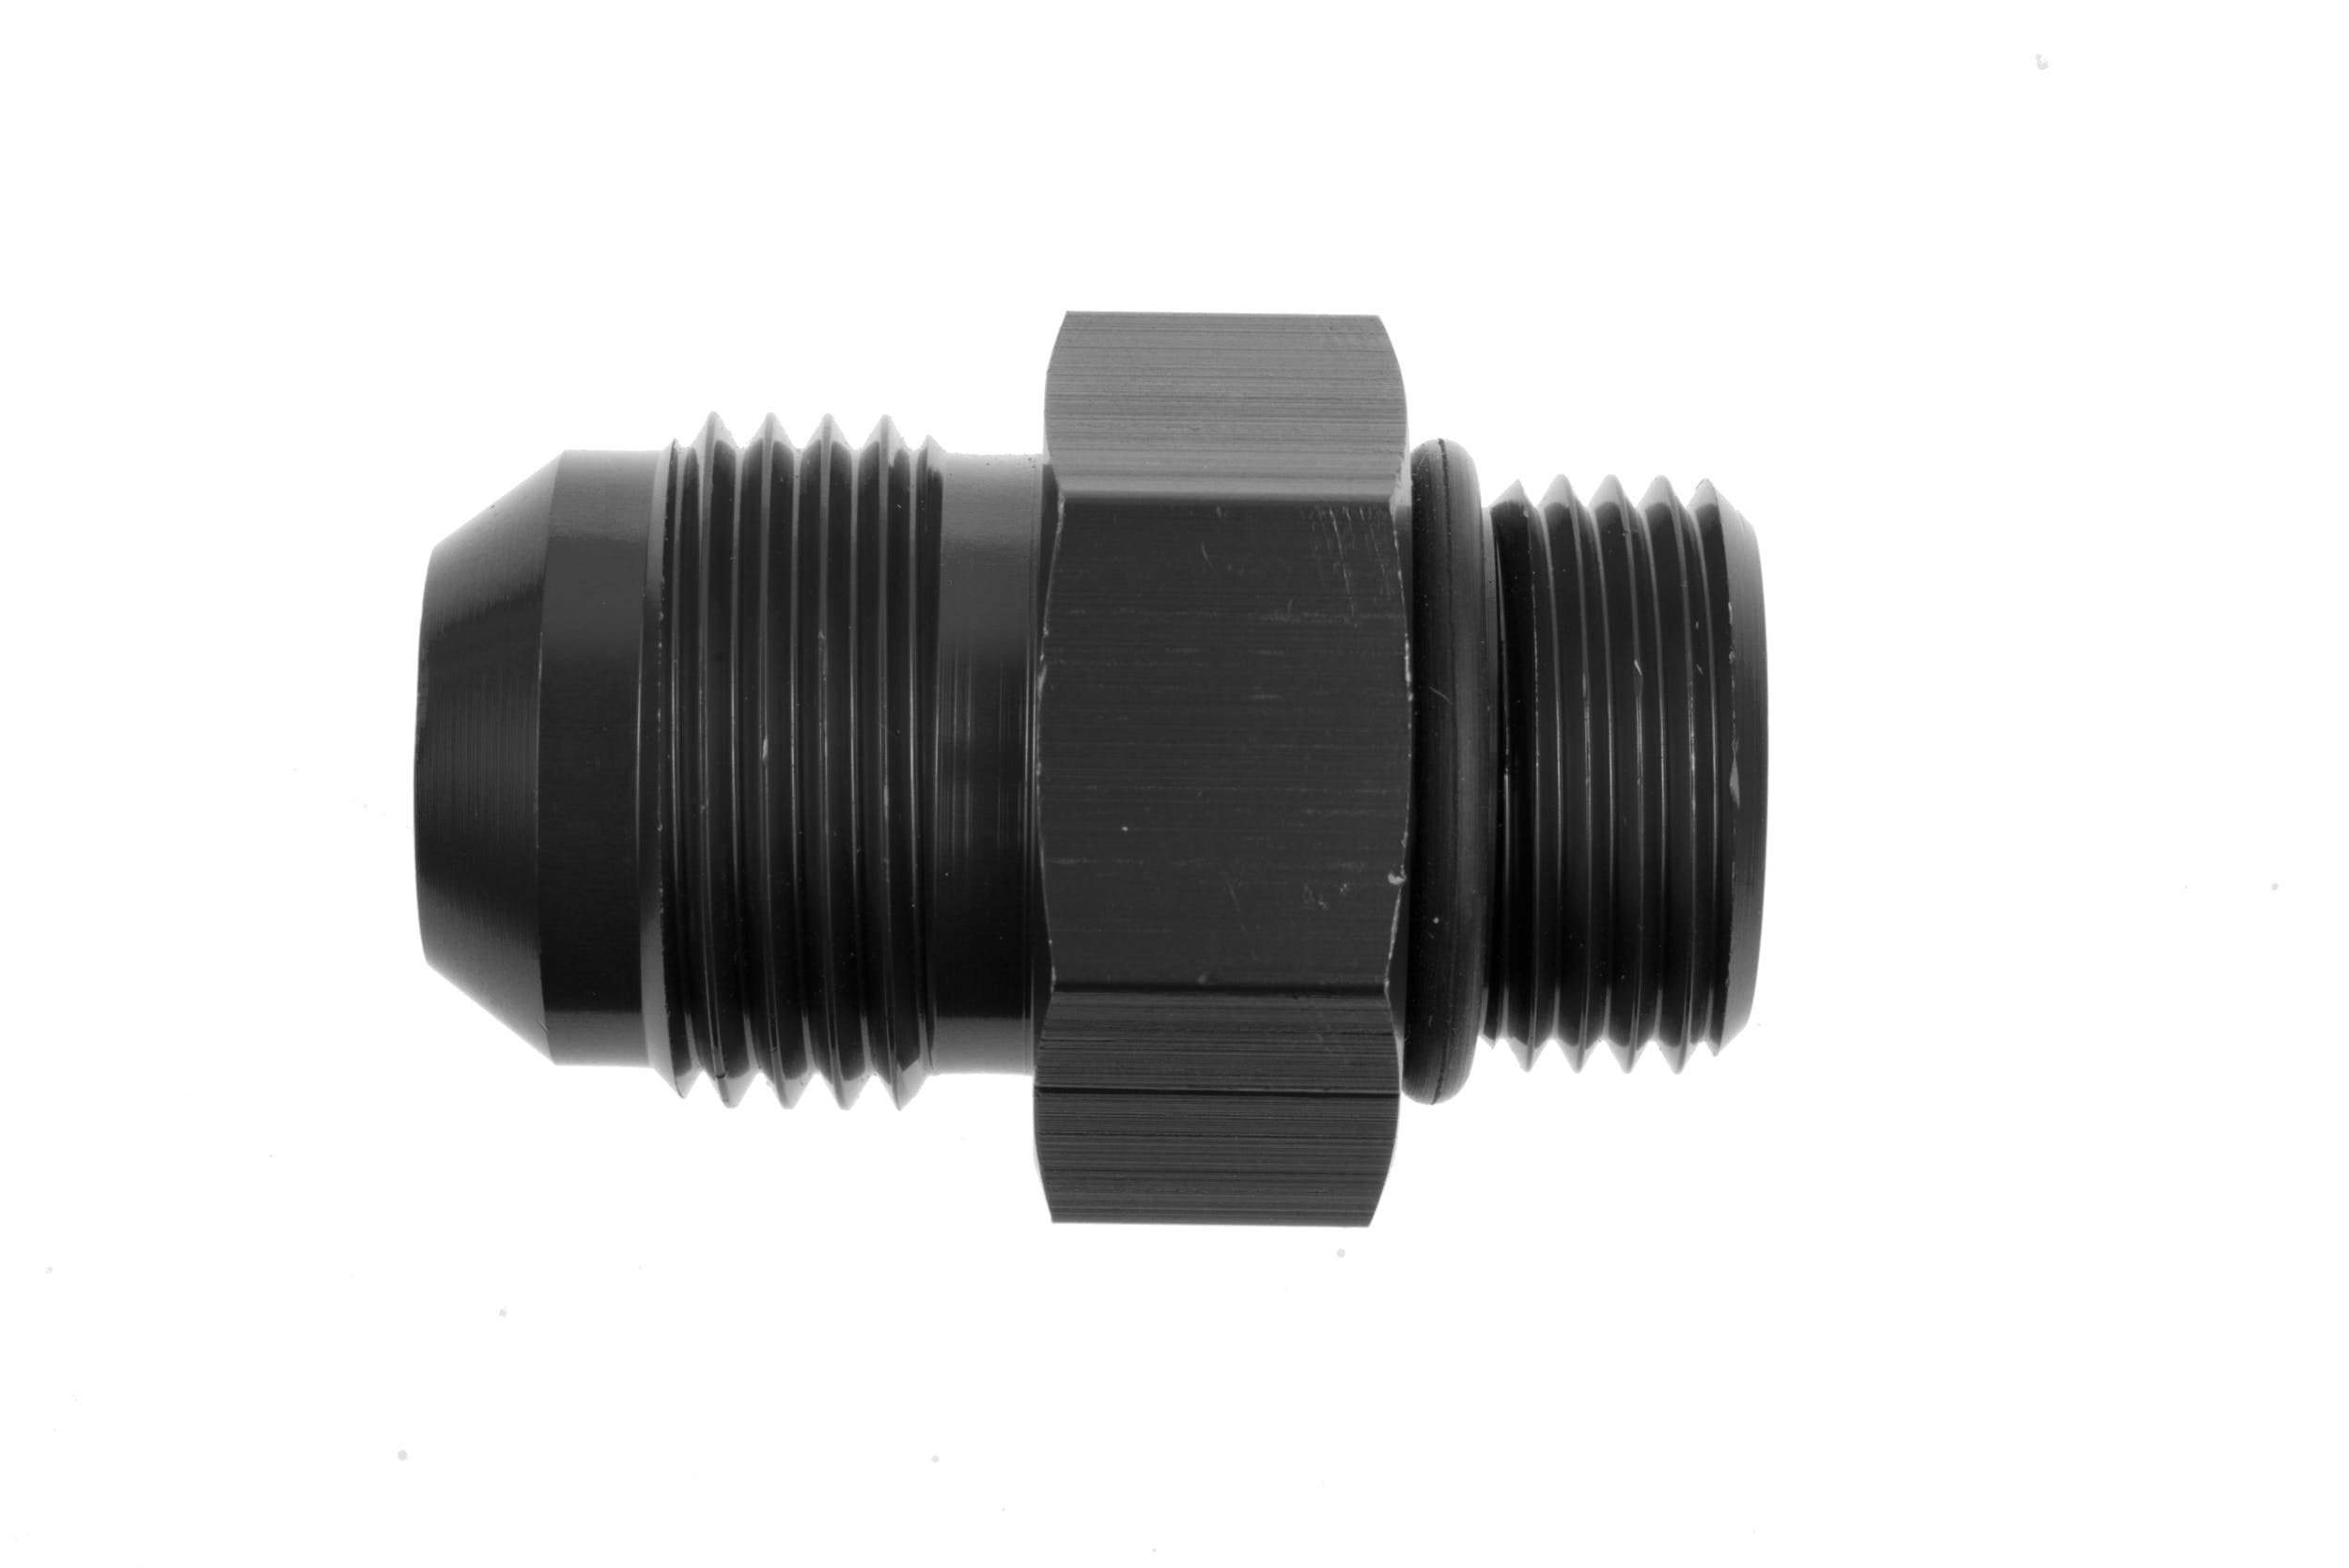 Redhorse Performance 920-08-06-2 -08 Male to -06 o-ring port adapter (high flow radius ORB) - black